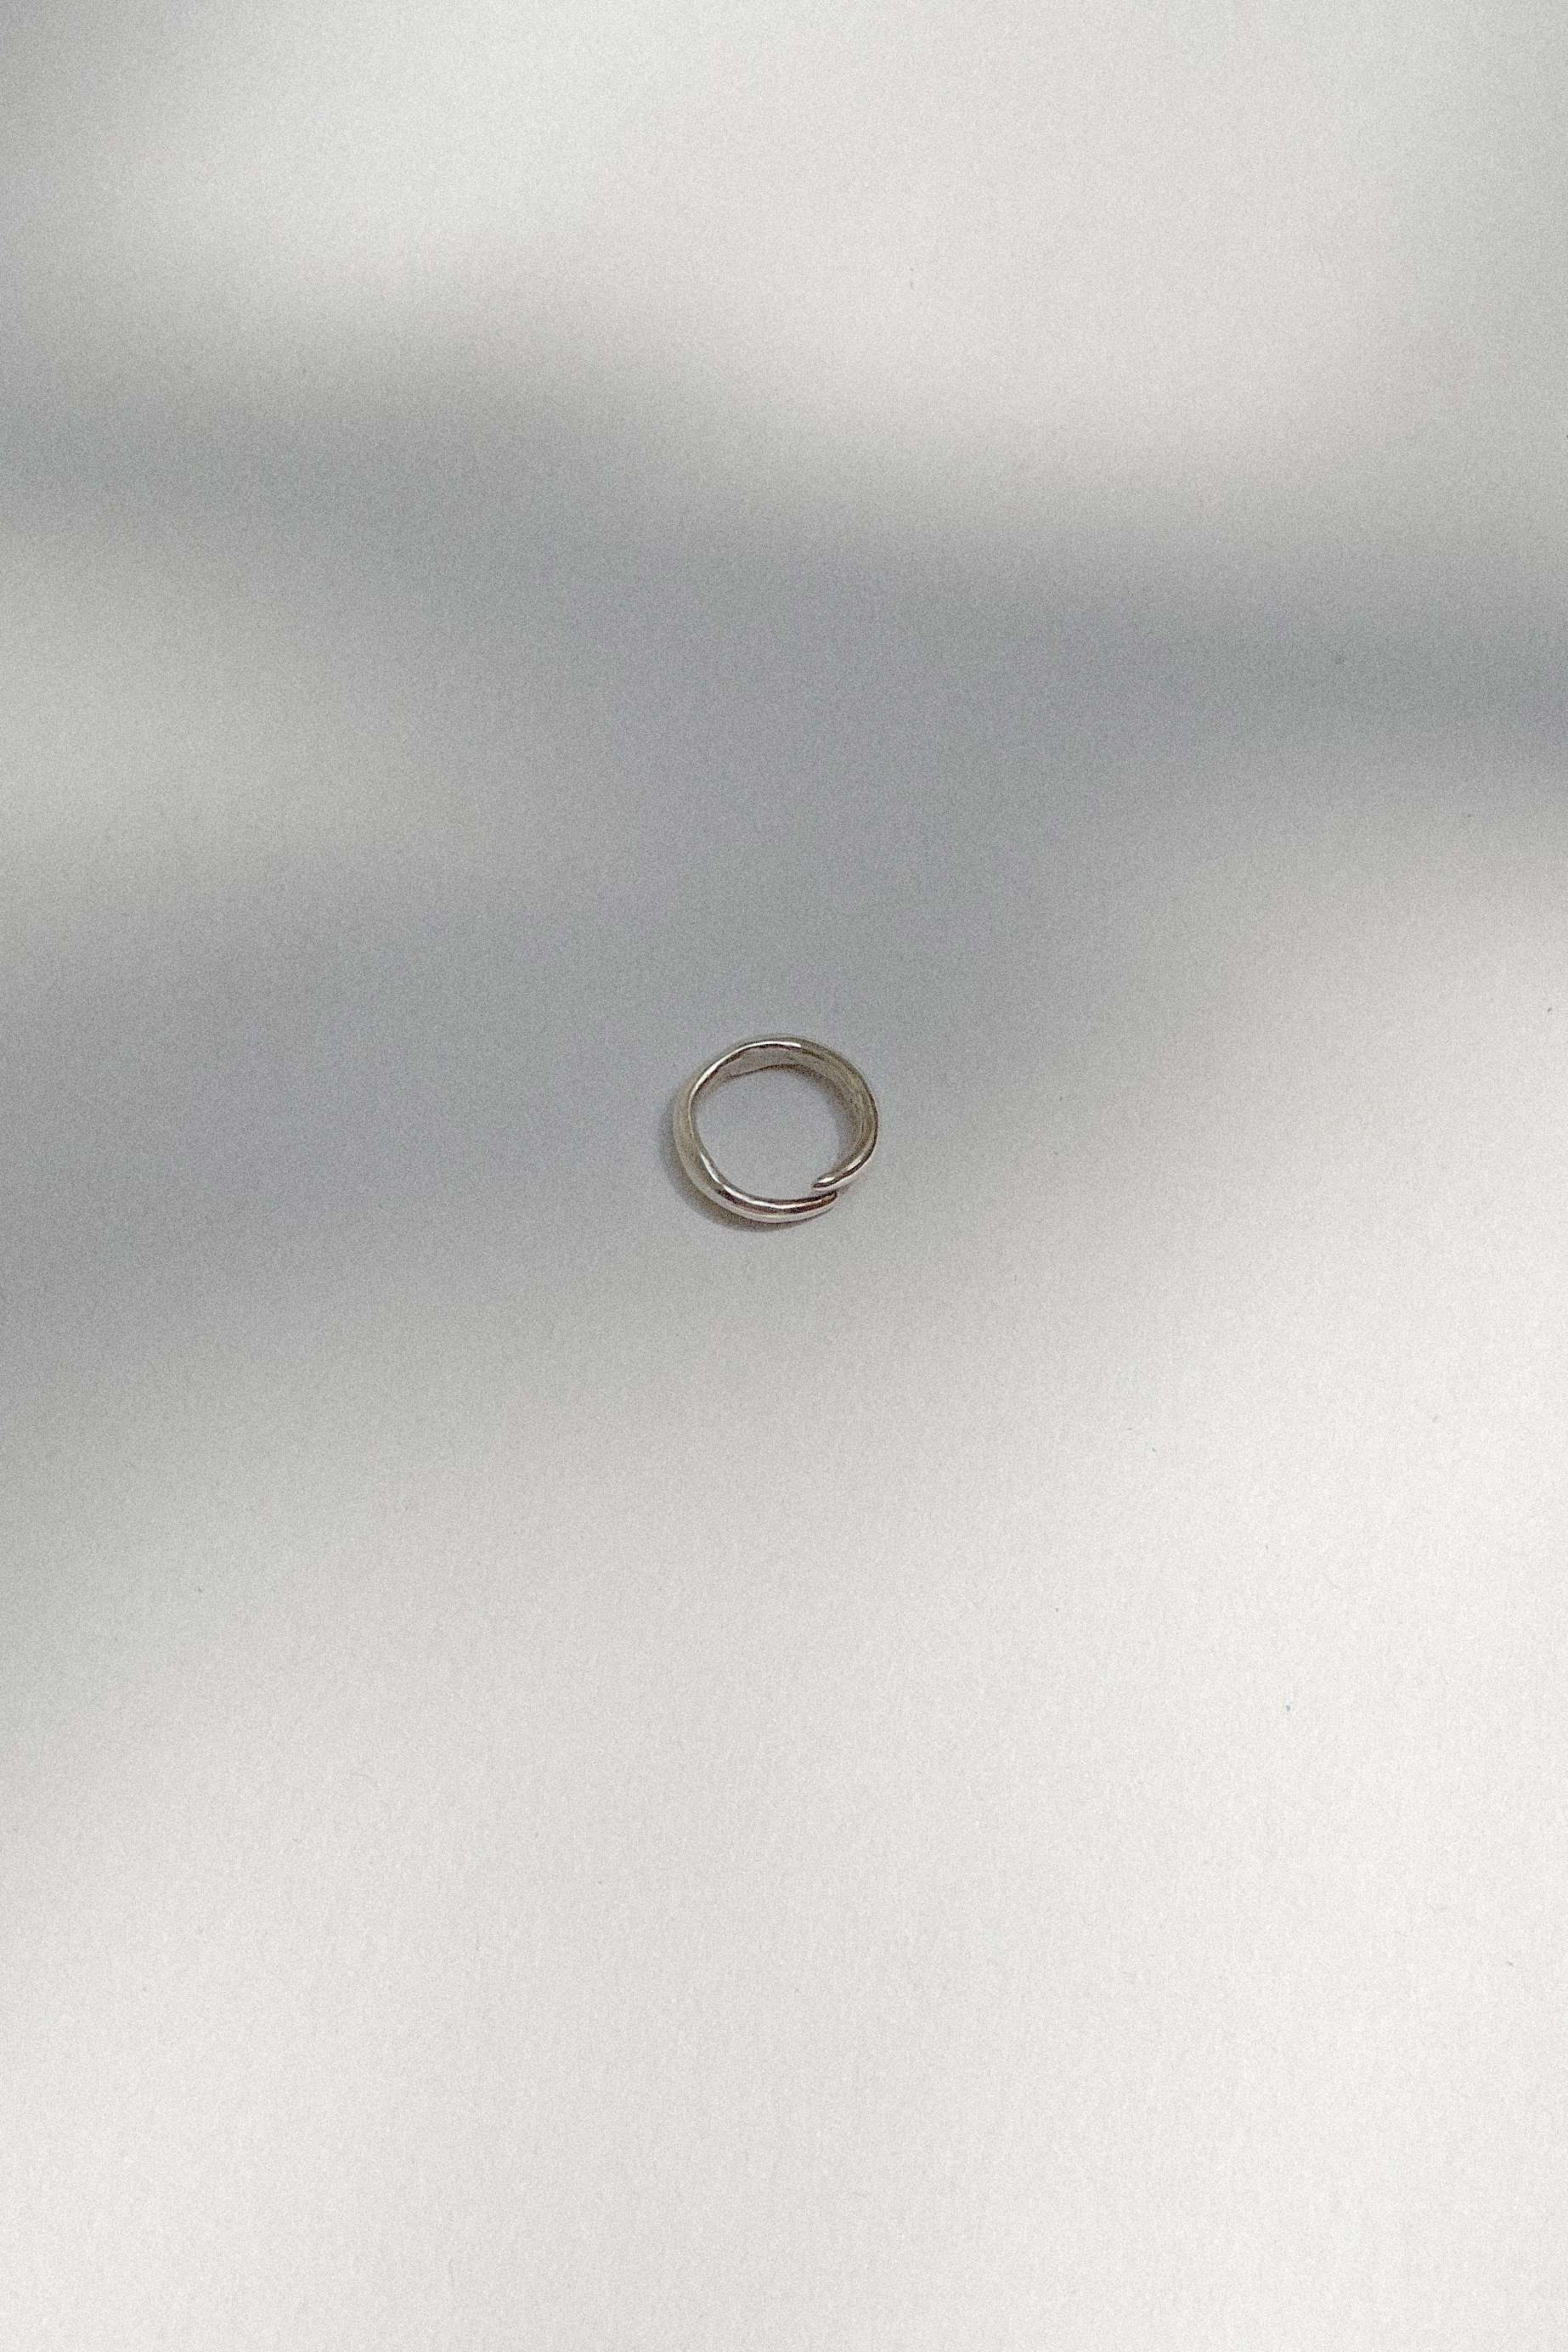 Image of Edition 4. Piece 5. Ring